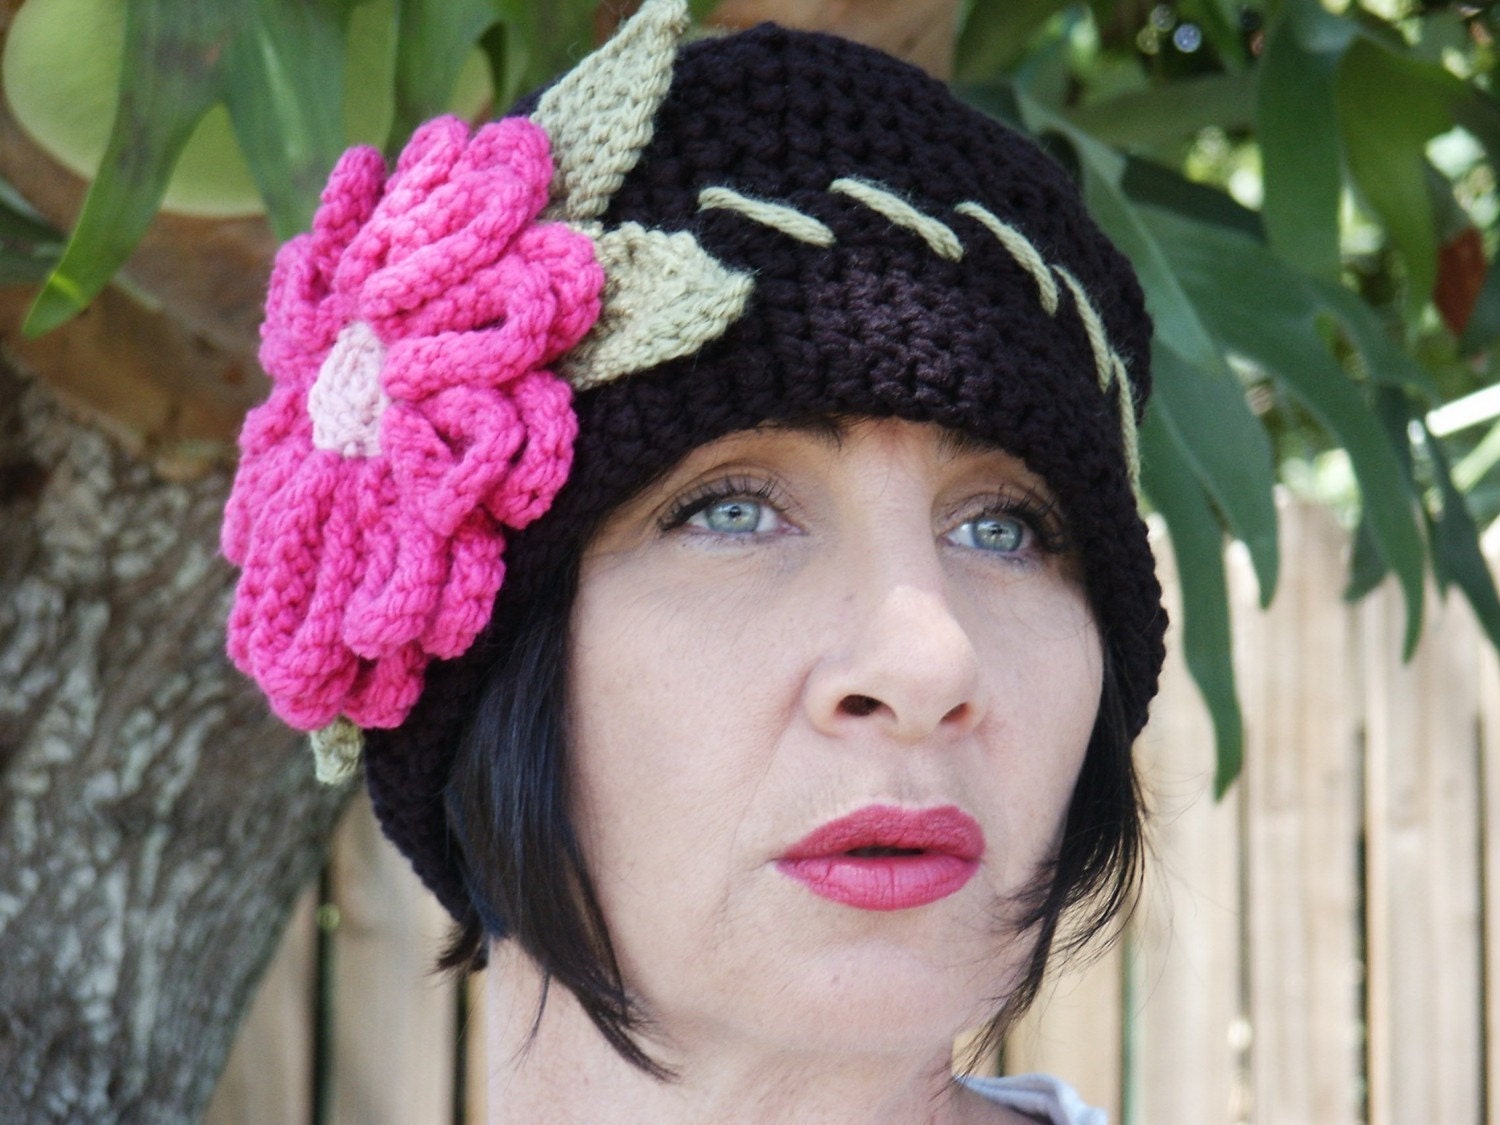 The Marcie hat with pink flower